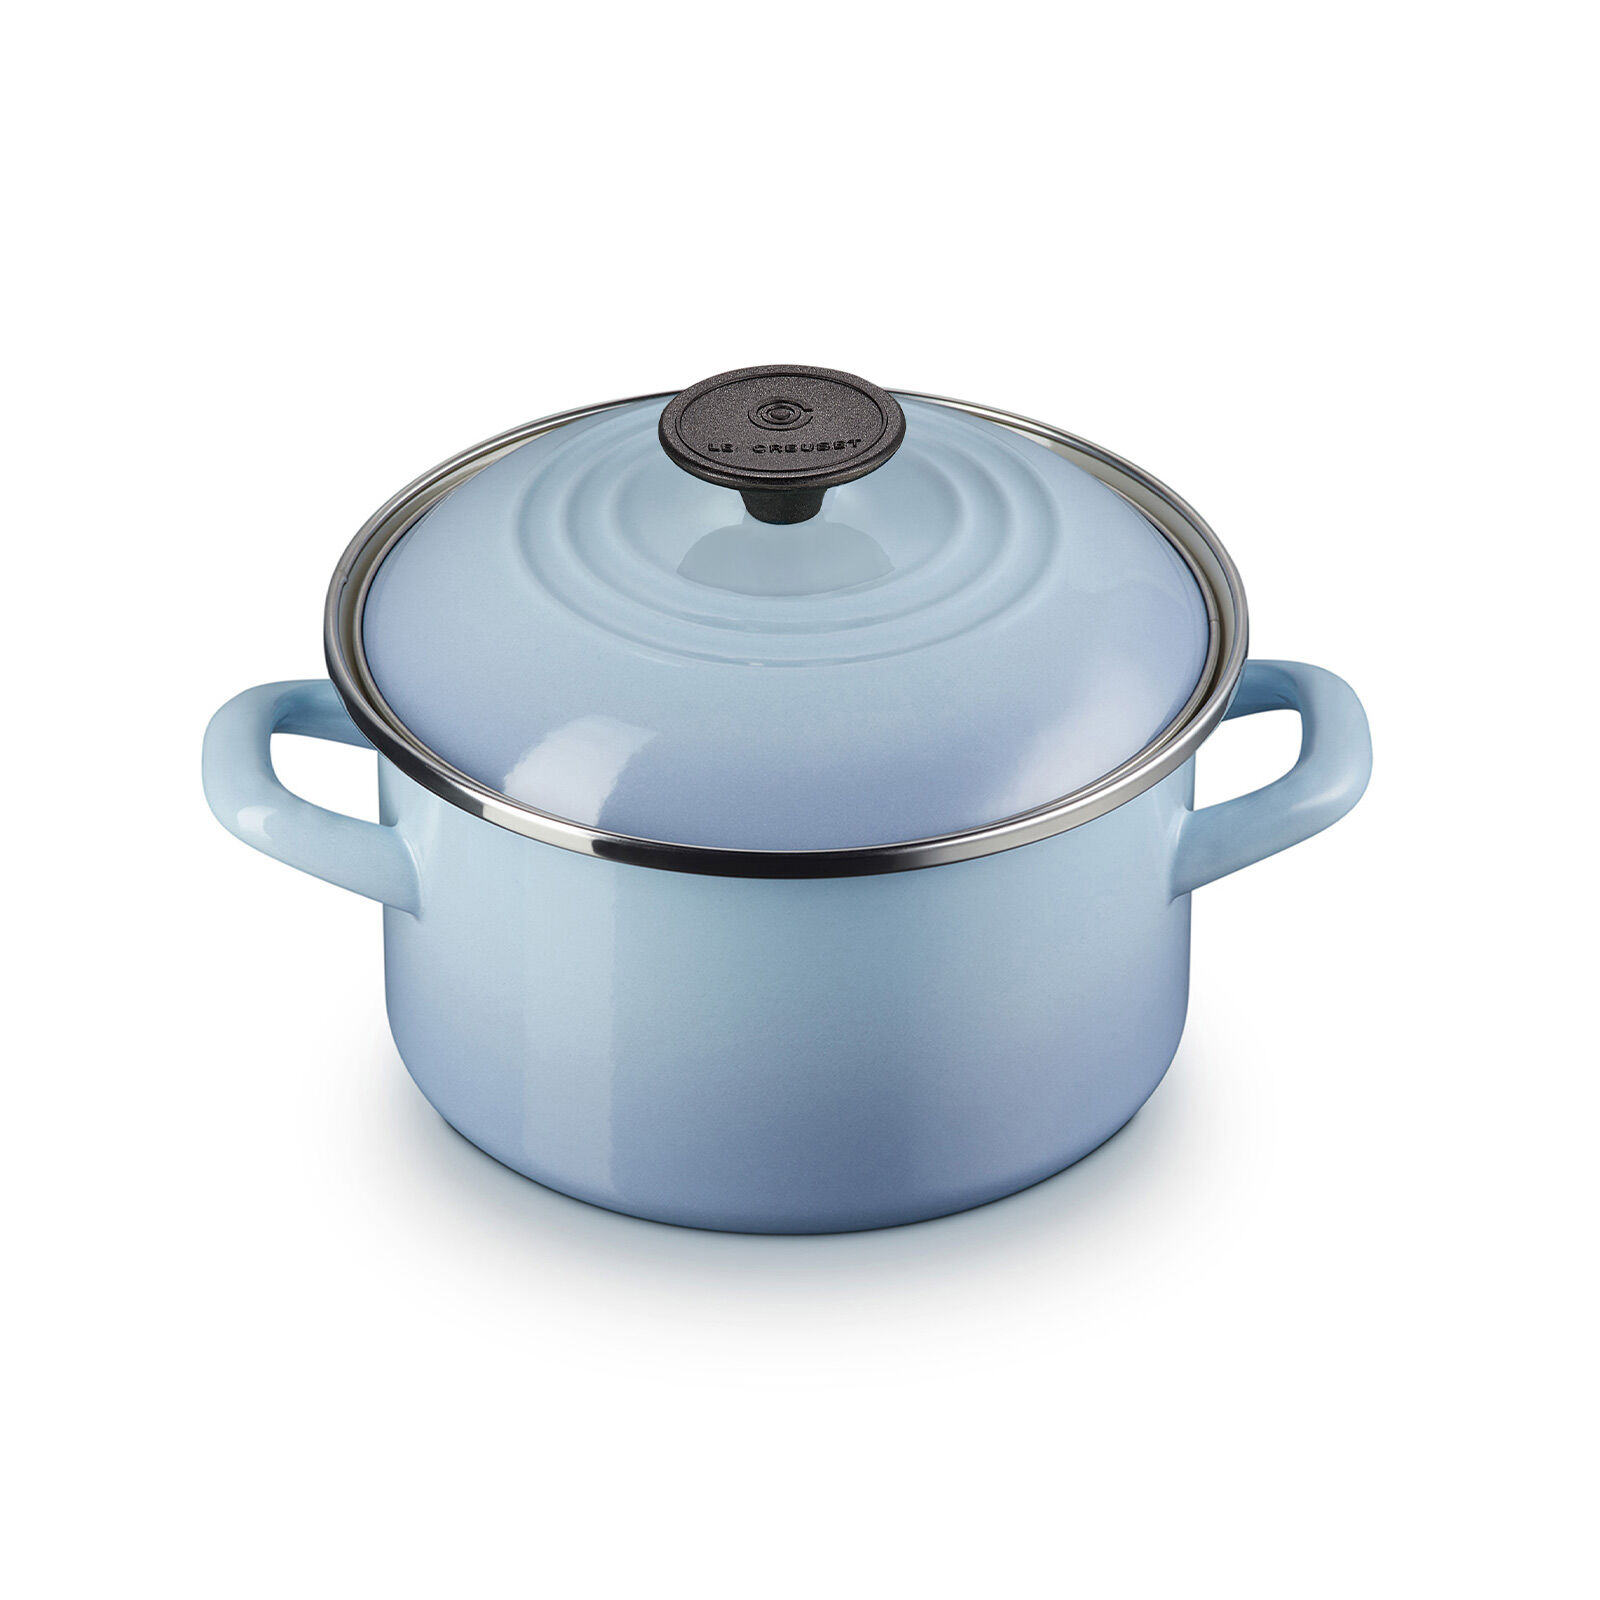 EOS キャセロール | 両手鍋 ｜ル・クルーゼ（Le Creuset）公式